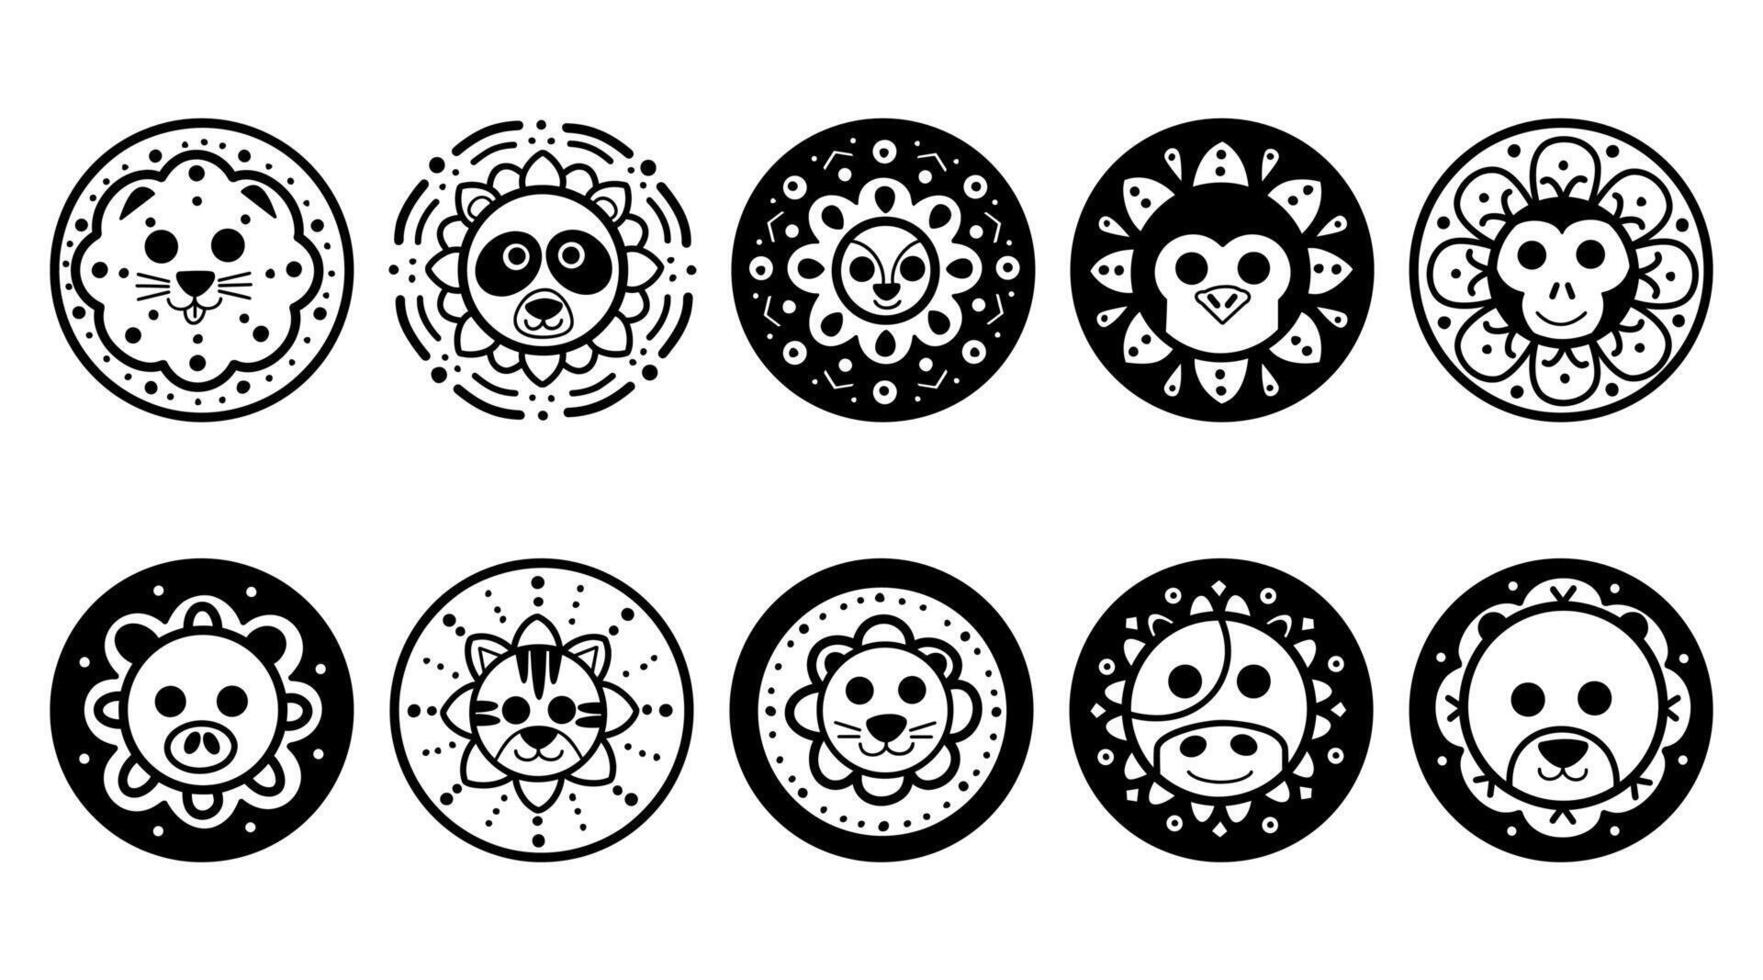 Cute animal mandalas collection, hand drawn black and white design, vector illustration.